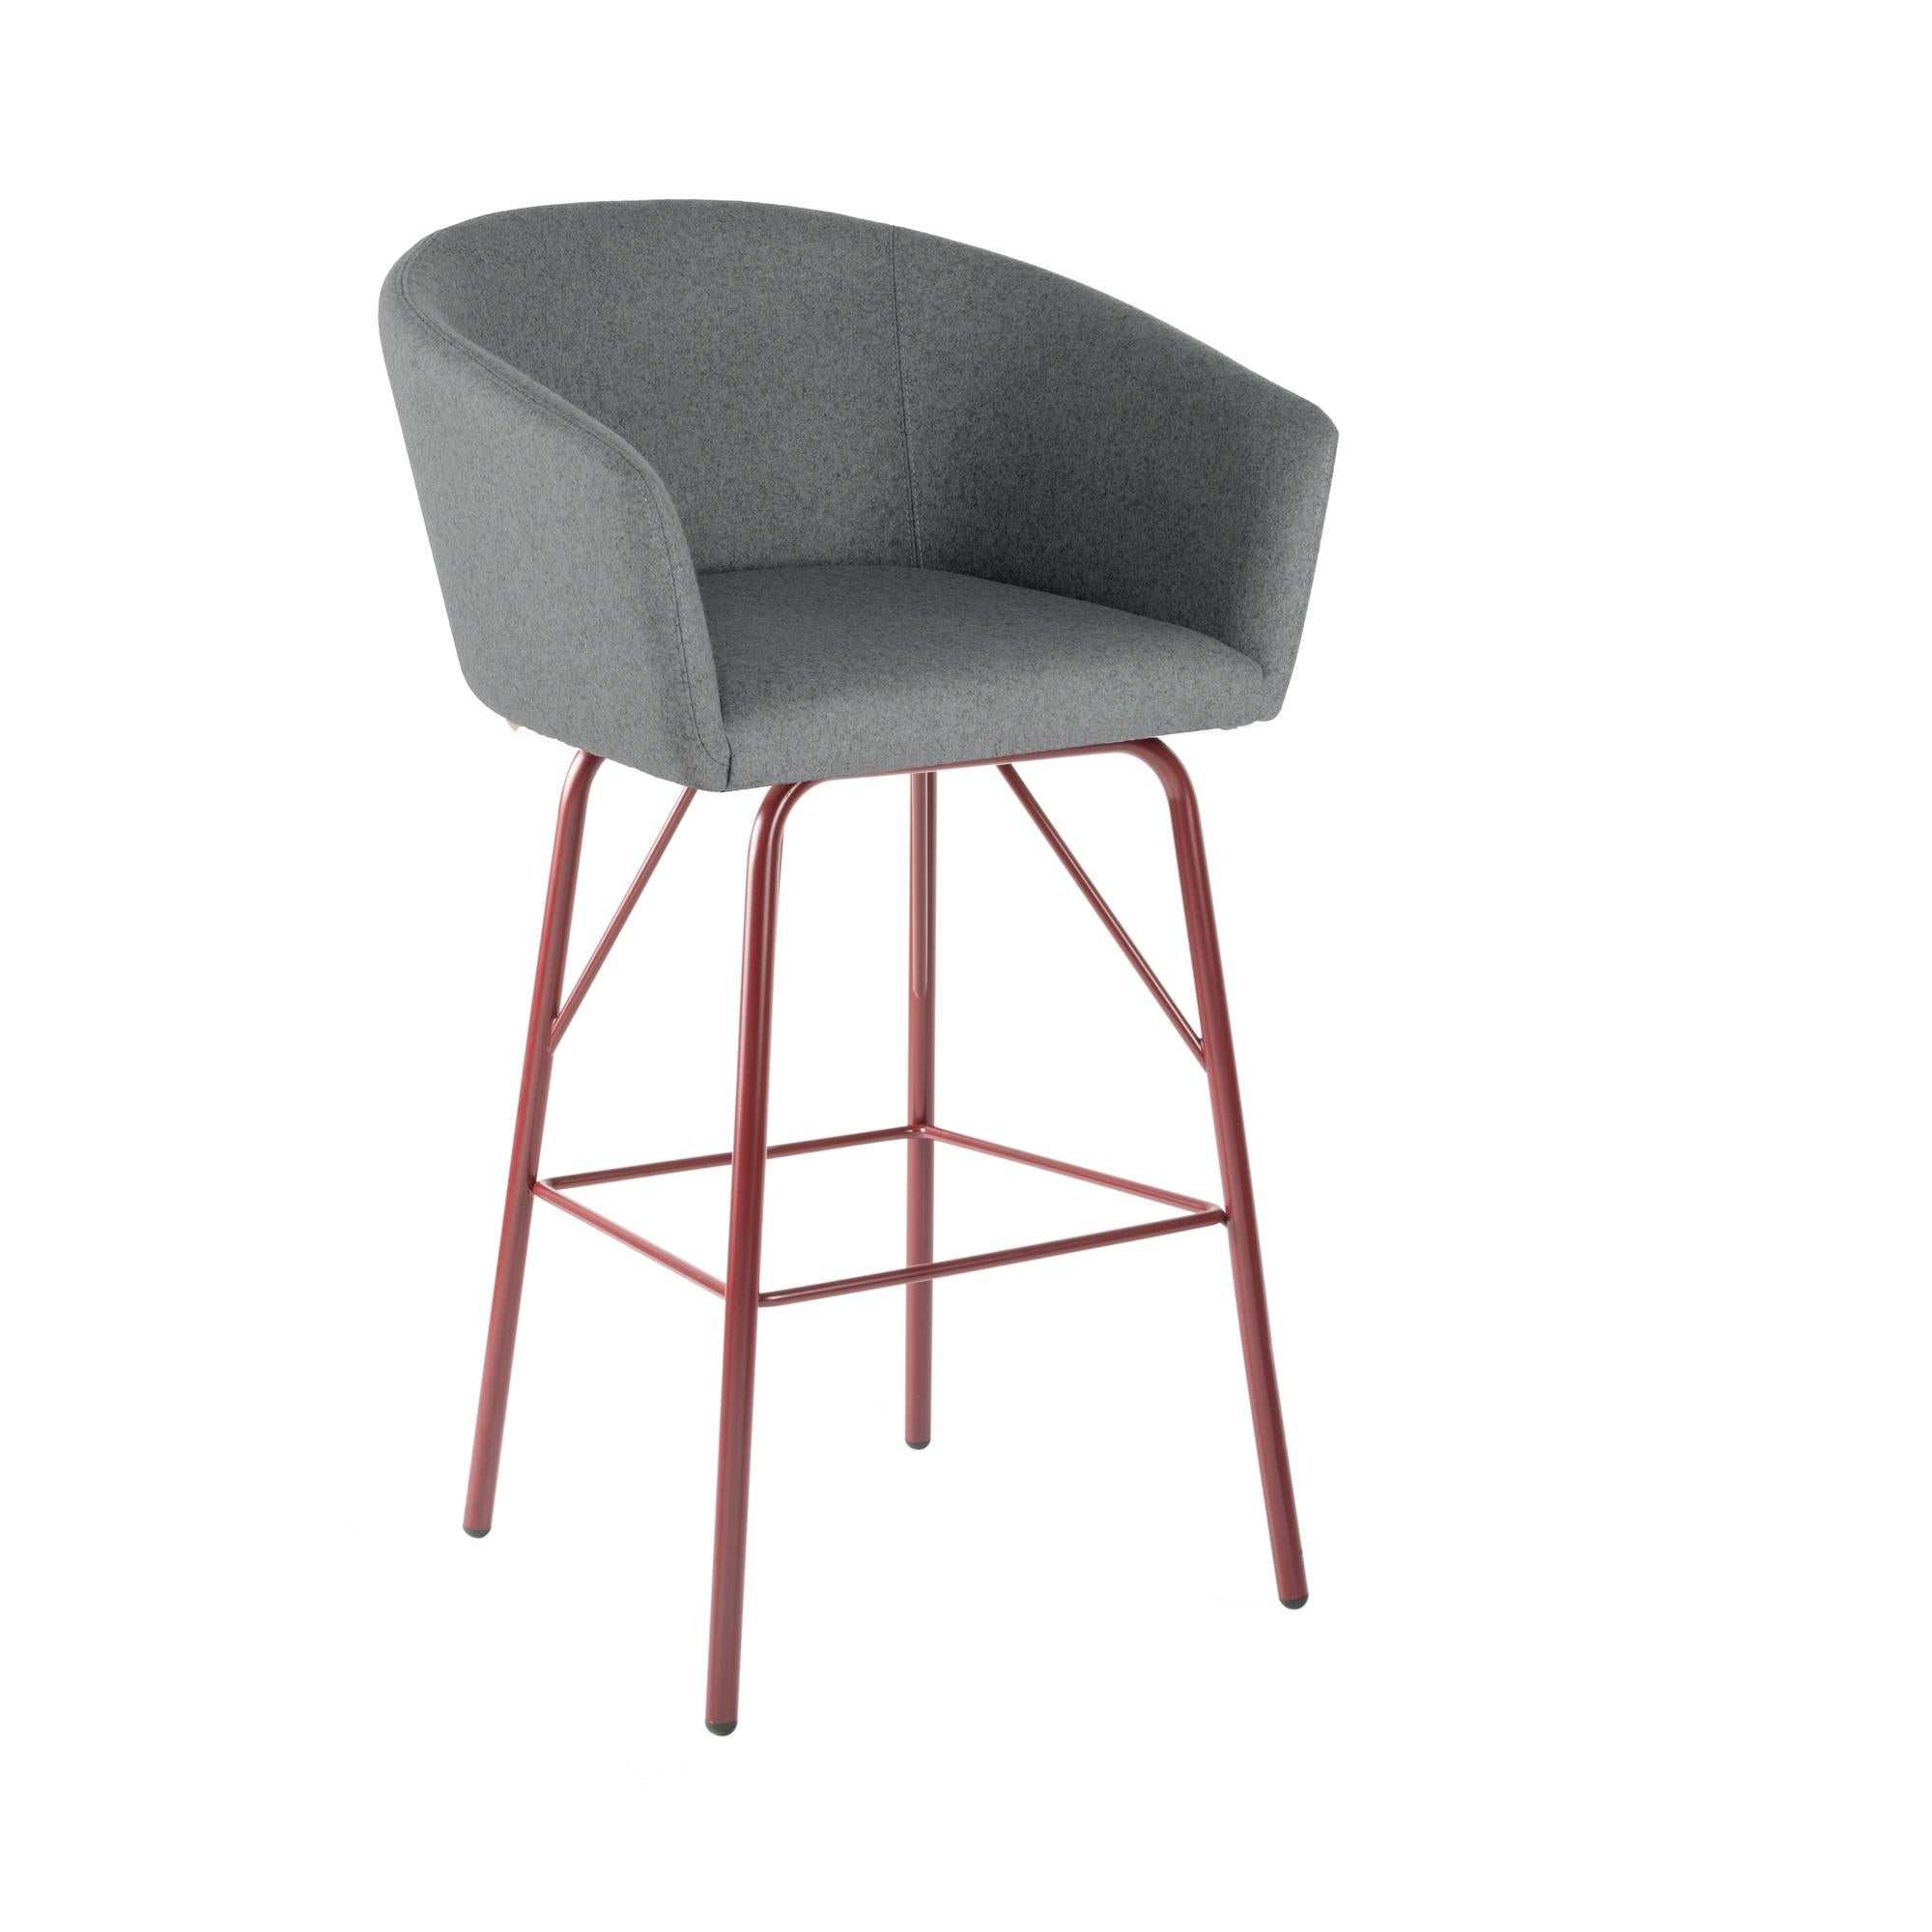 Tati Metal SG02 High Stool-New Life Contract-Contract Furniture Store